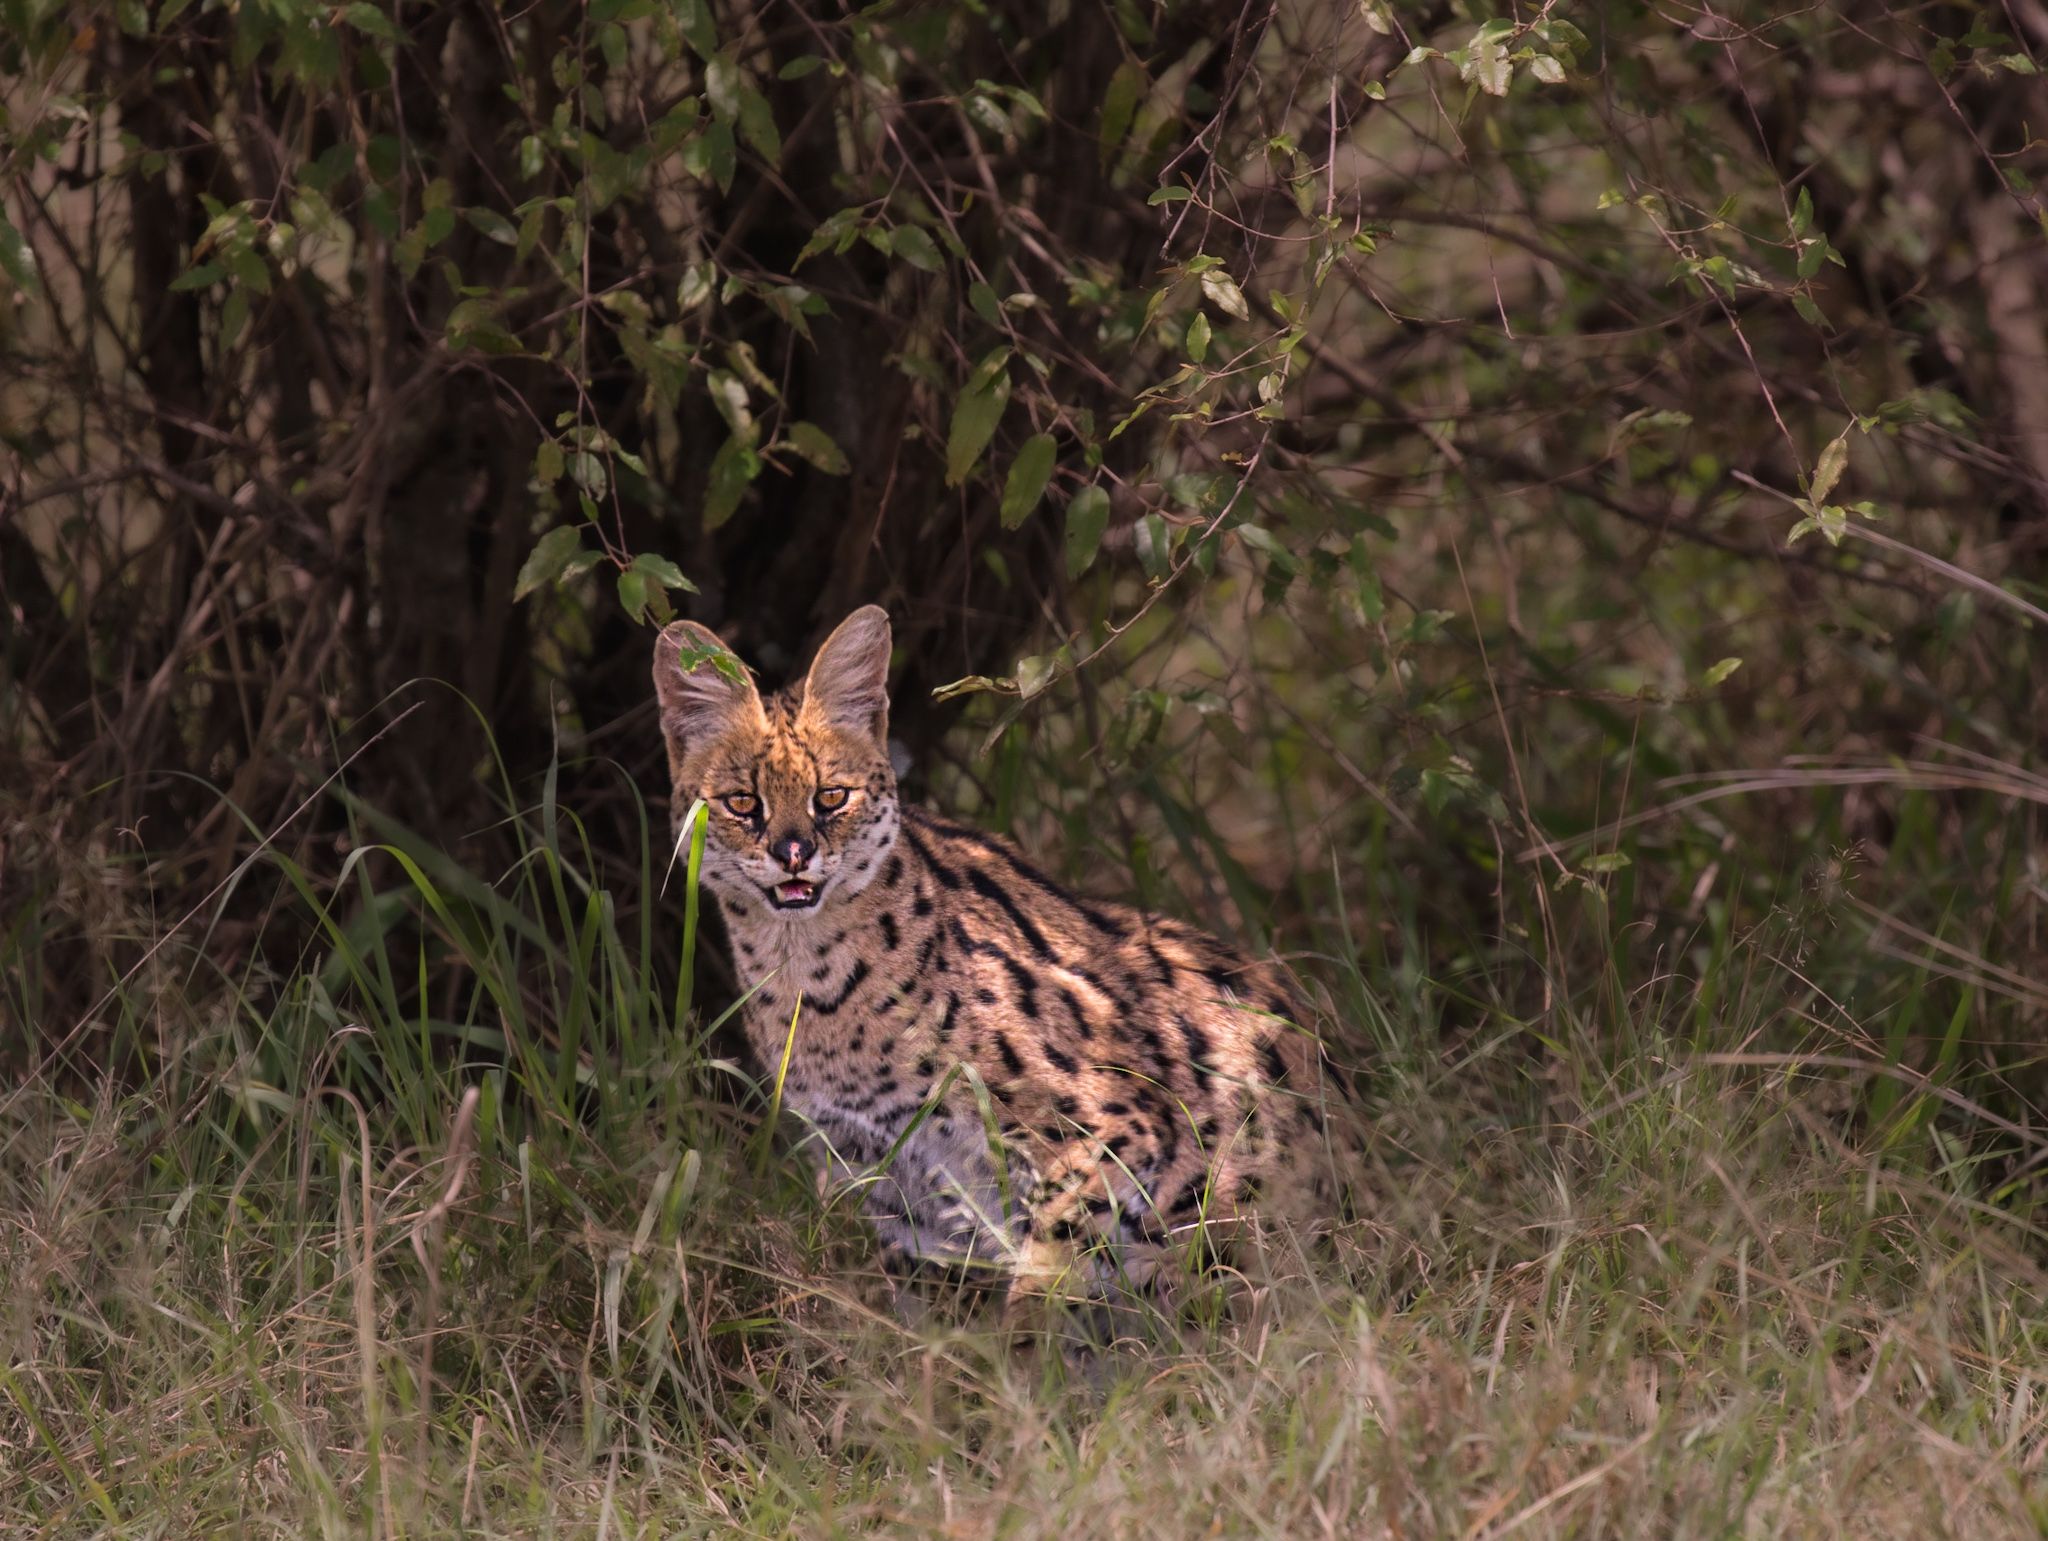 Have I been spotted? (The serval Cat)